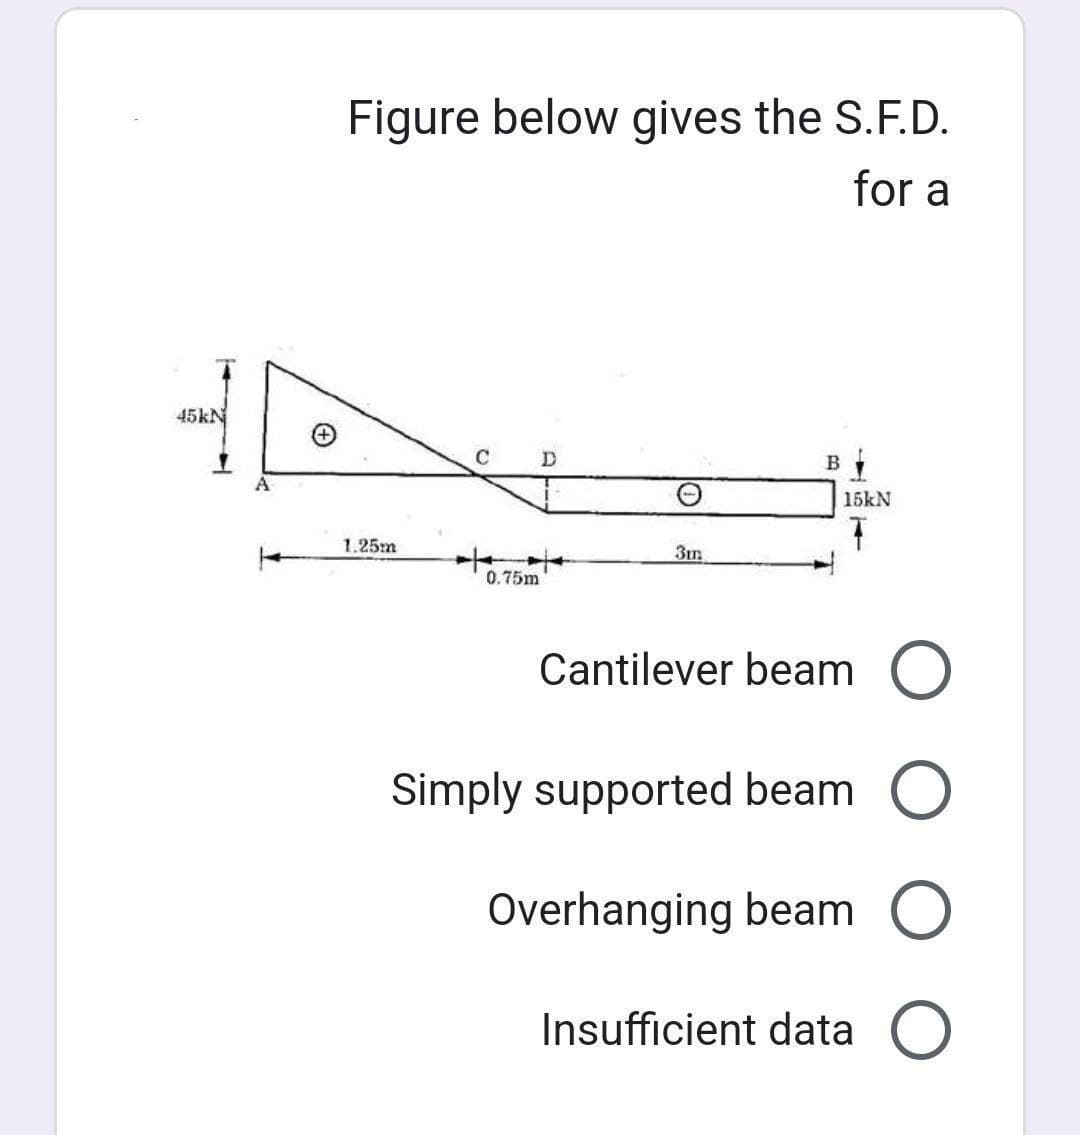 45kN
T
Figure below gives the S.F.D.
for a
1.25m
3m
0.75m
B
15kN
Cantilever beam ◎
Simply supported beam ◎
Overhanging beam ○
Insufficient data ◎